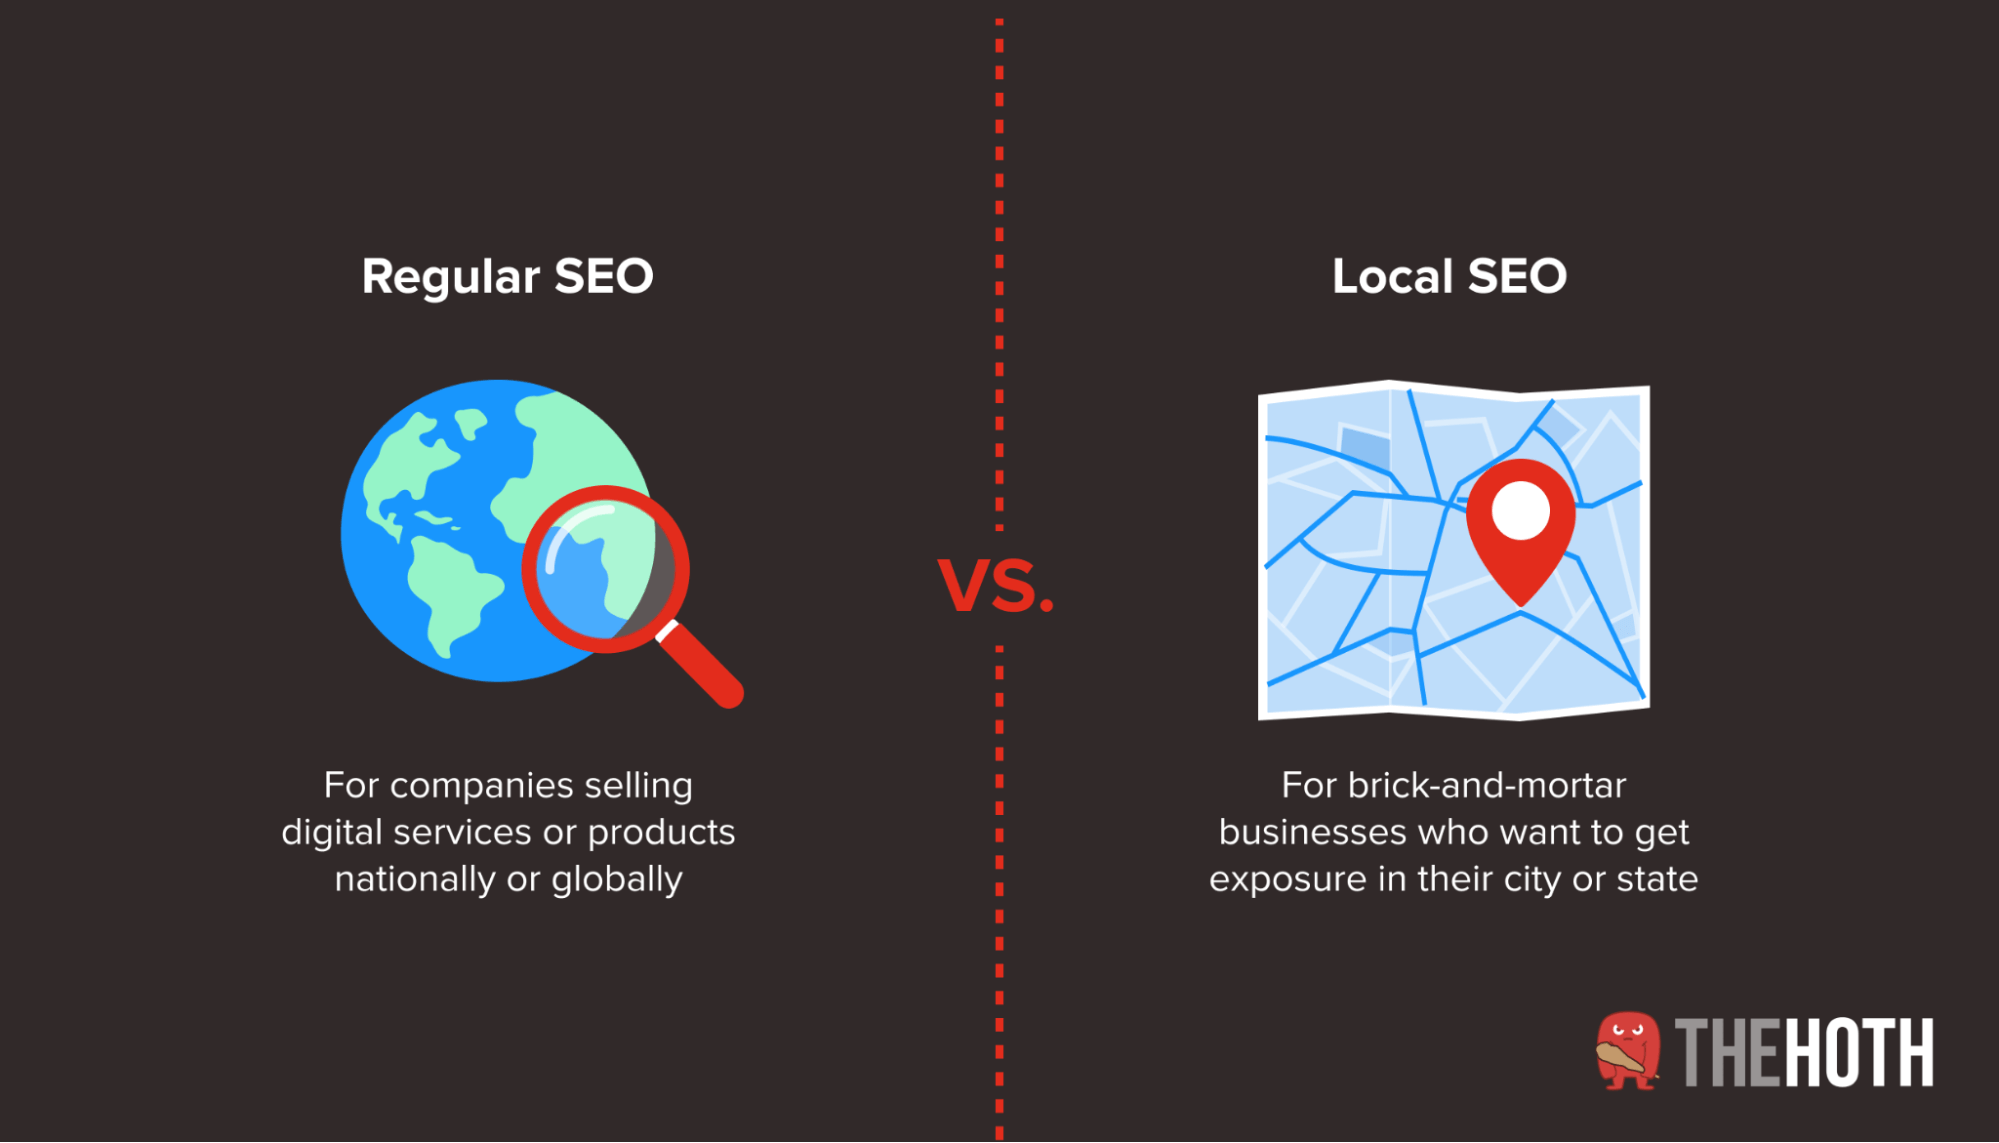 Graphic comparing regular and local SEO